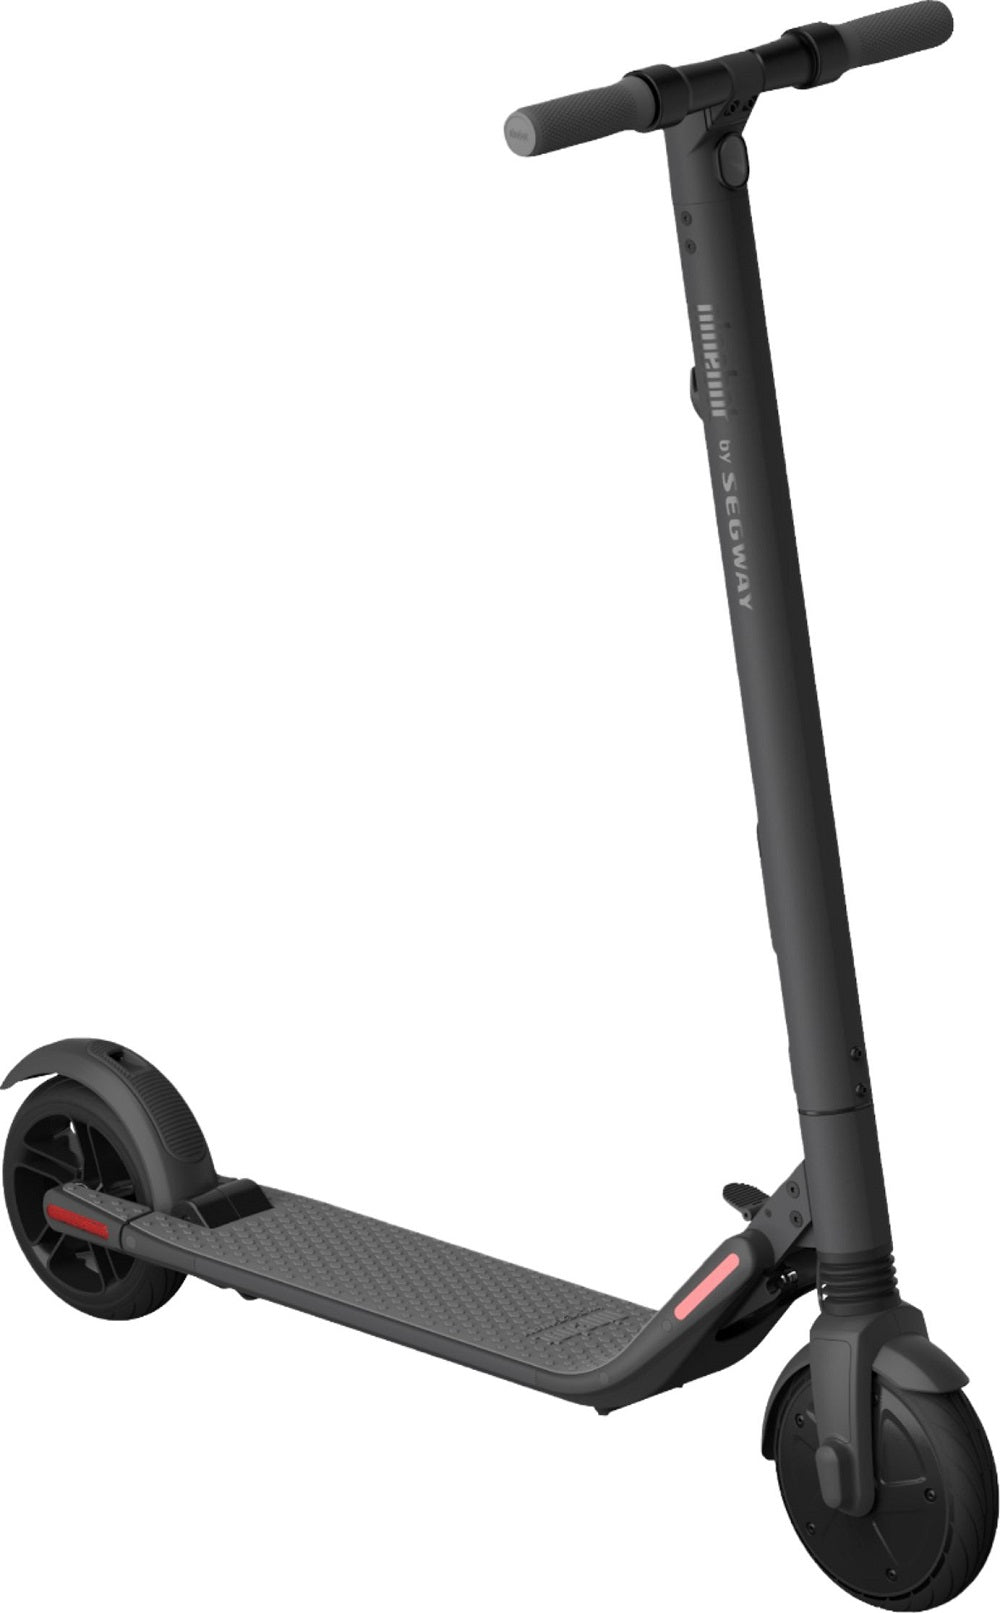 Segway Ninebot ES2-N Foldable Electric Scooter w/ 15.5mph Max Speed - Dark Gray (Used)